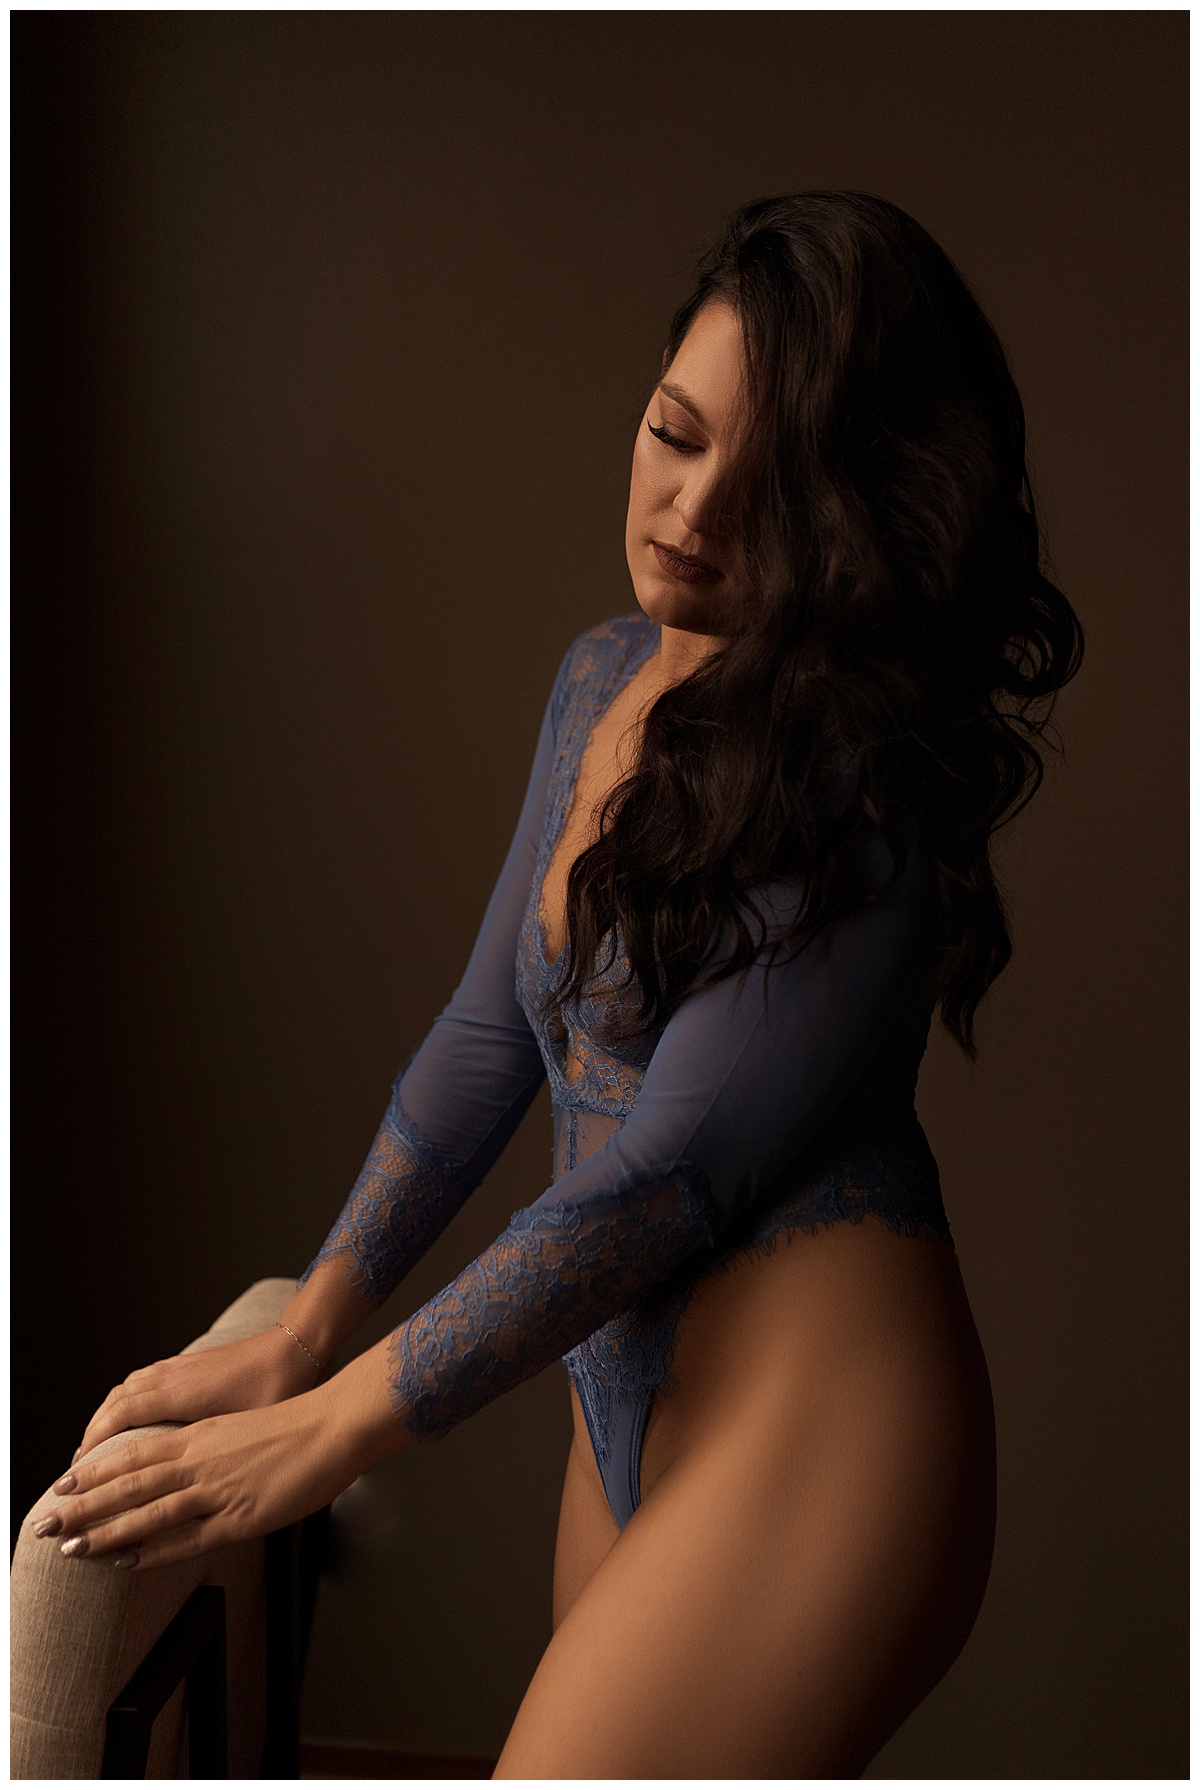 Girl stands behind a chair wearing blue lingerie for Sioux Falls Boudoir Photographer